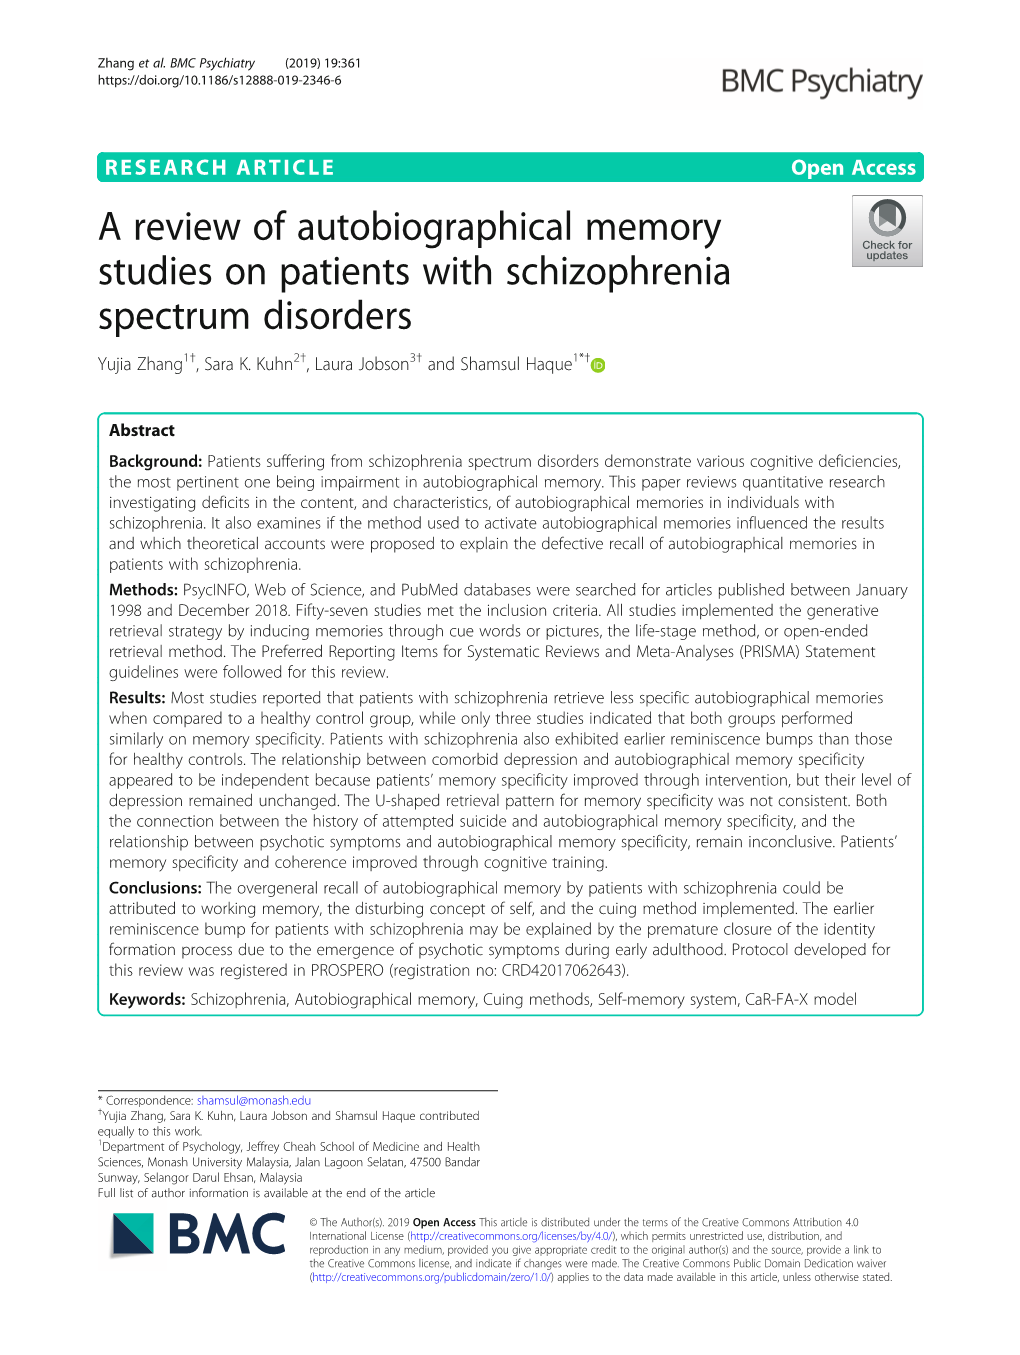 A Review of Autobiographical Memory Studies on Patients with Schizophrenia Spectrum Disorders Yujia Zhang1†, Sara K